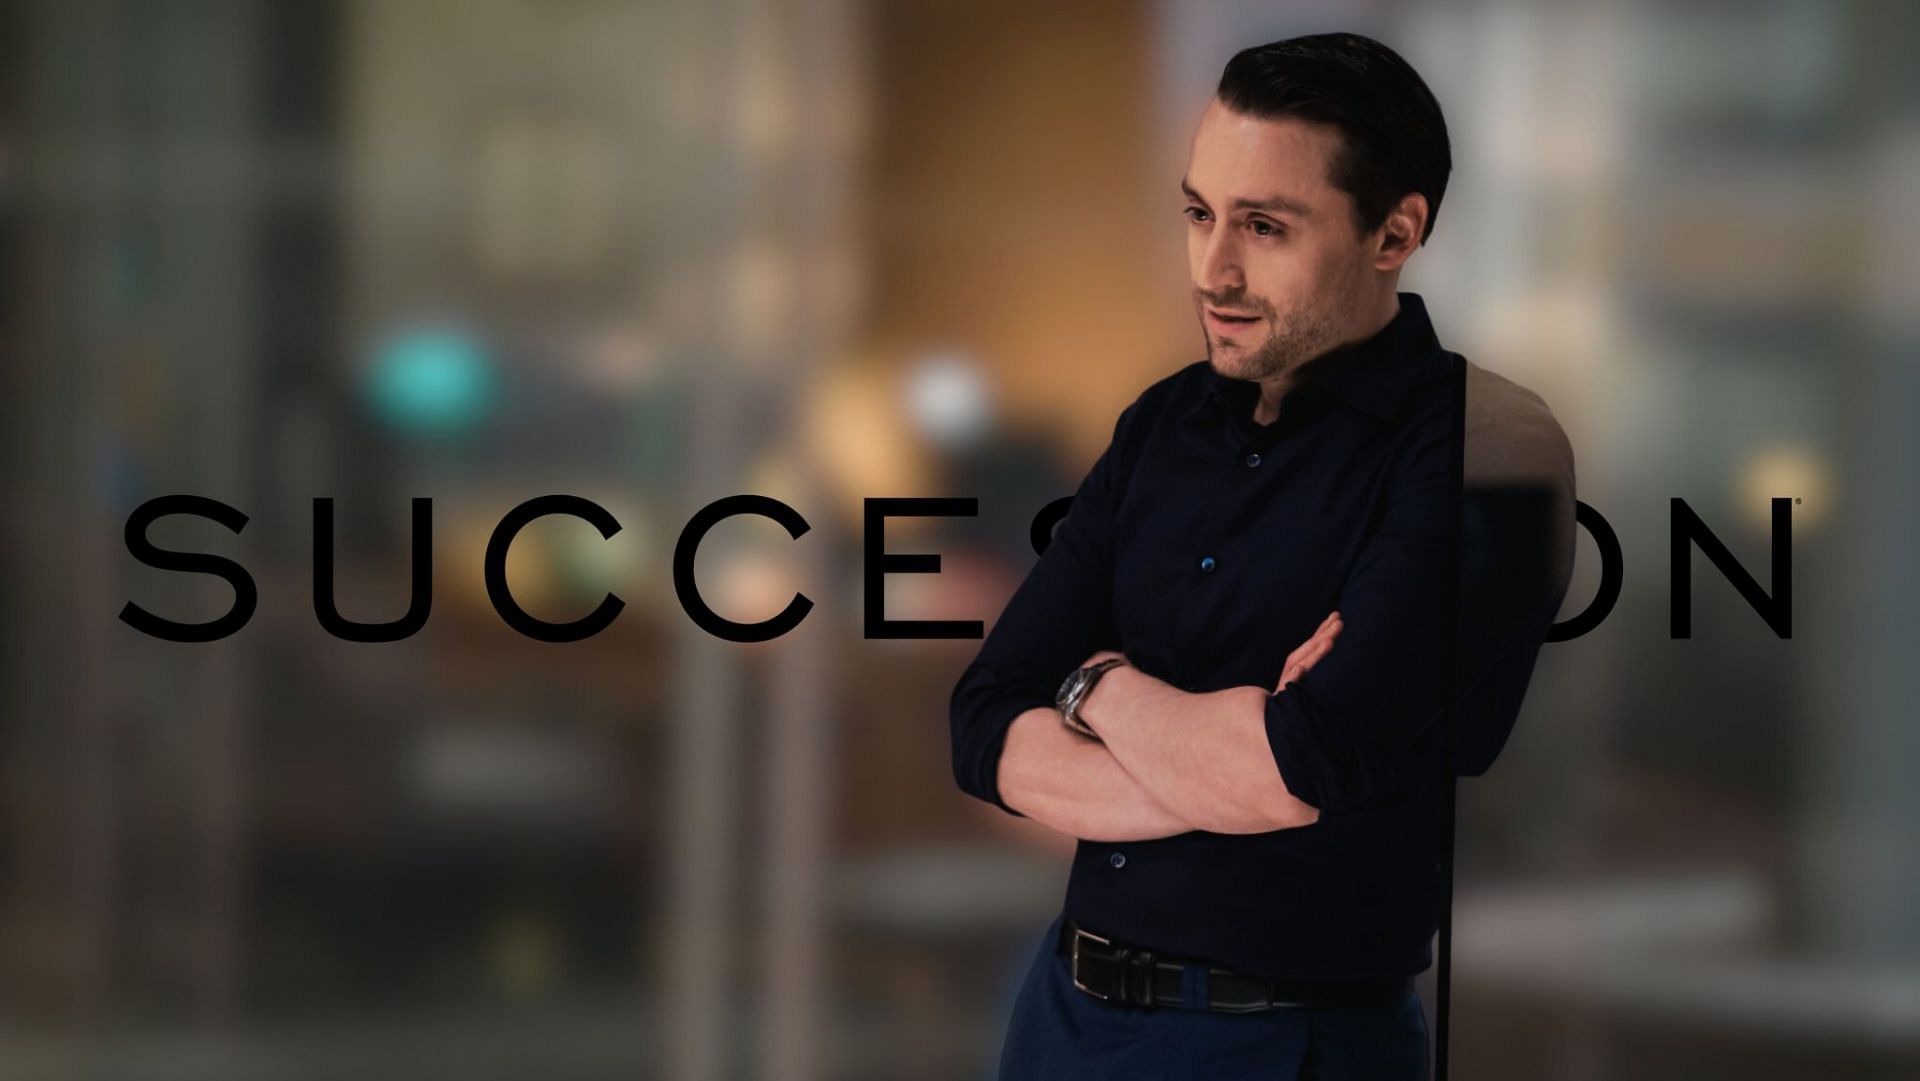 Succession star Kieran Culkin hints at the possibility of Season 5, adding to the uncertainty surrounding the show